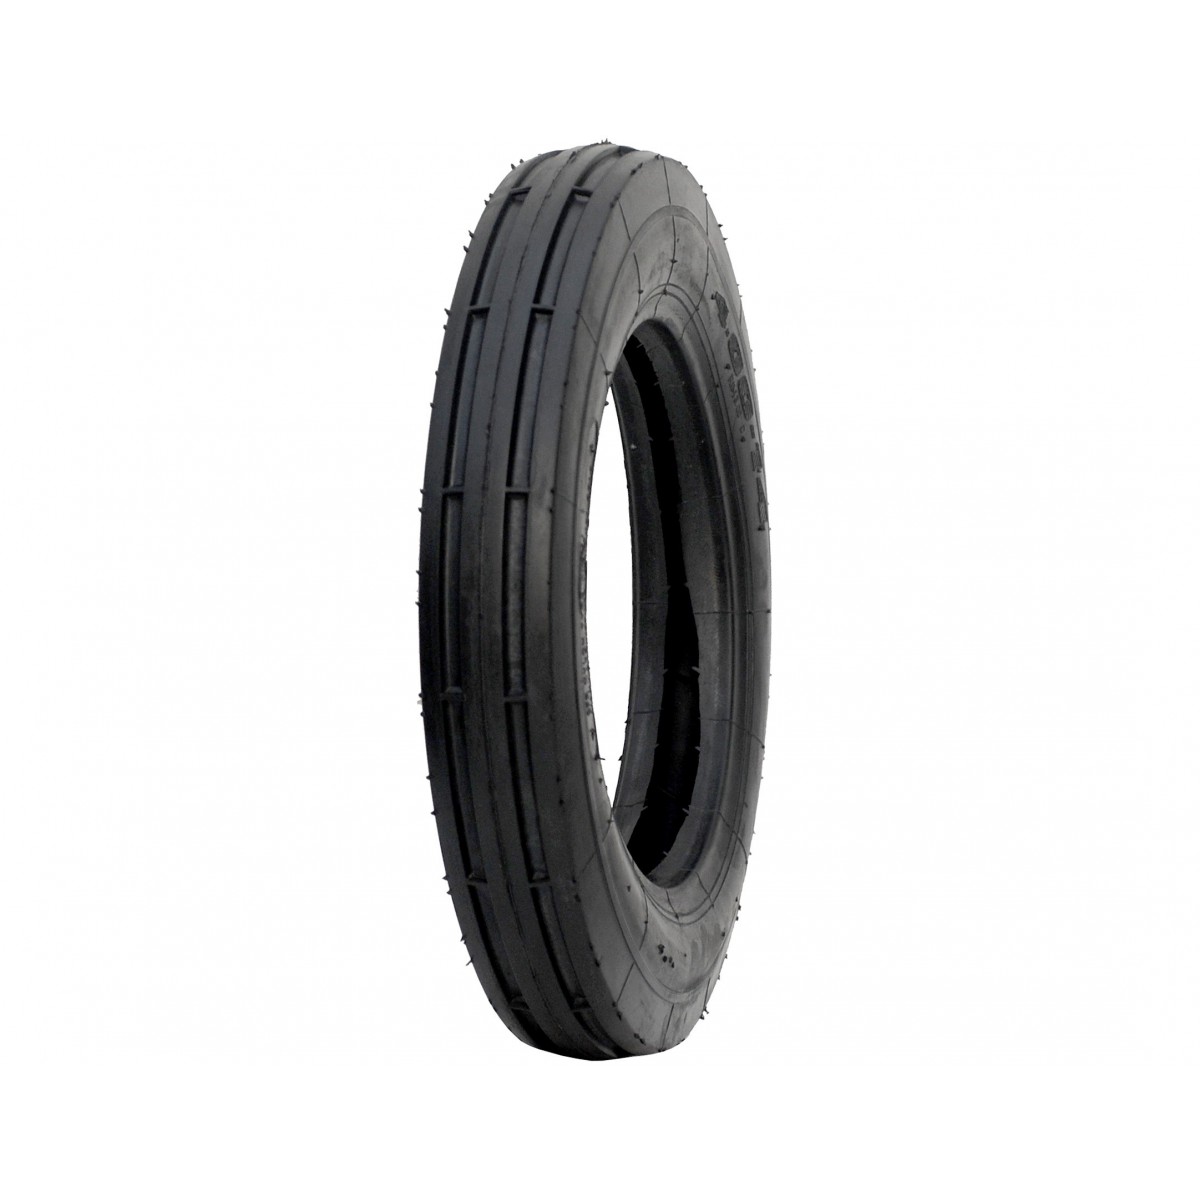 Agricultural tire 4.00-14 6PR 4-14 4x14 SMOOTH